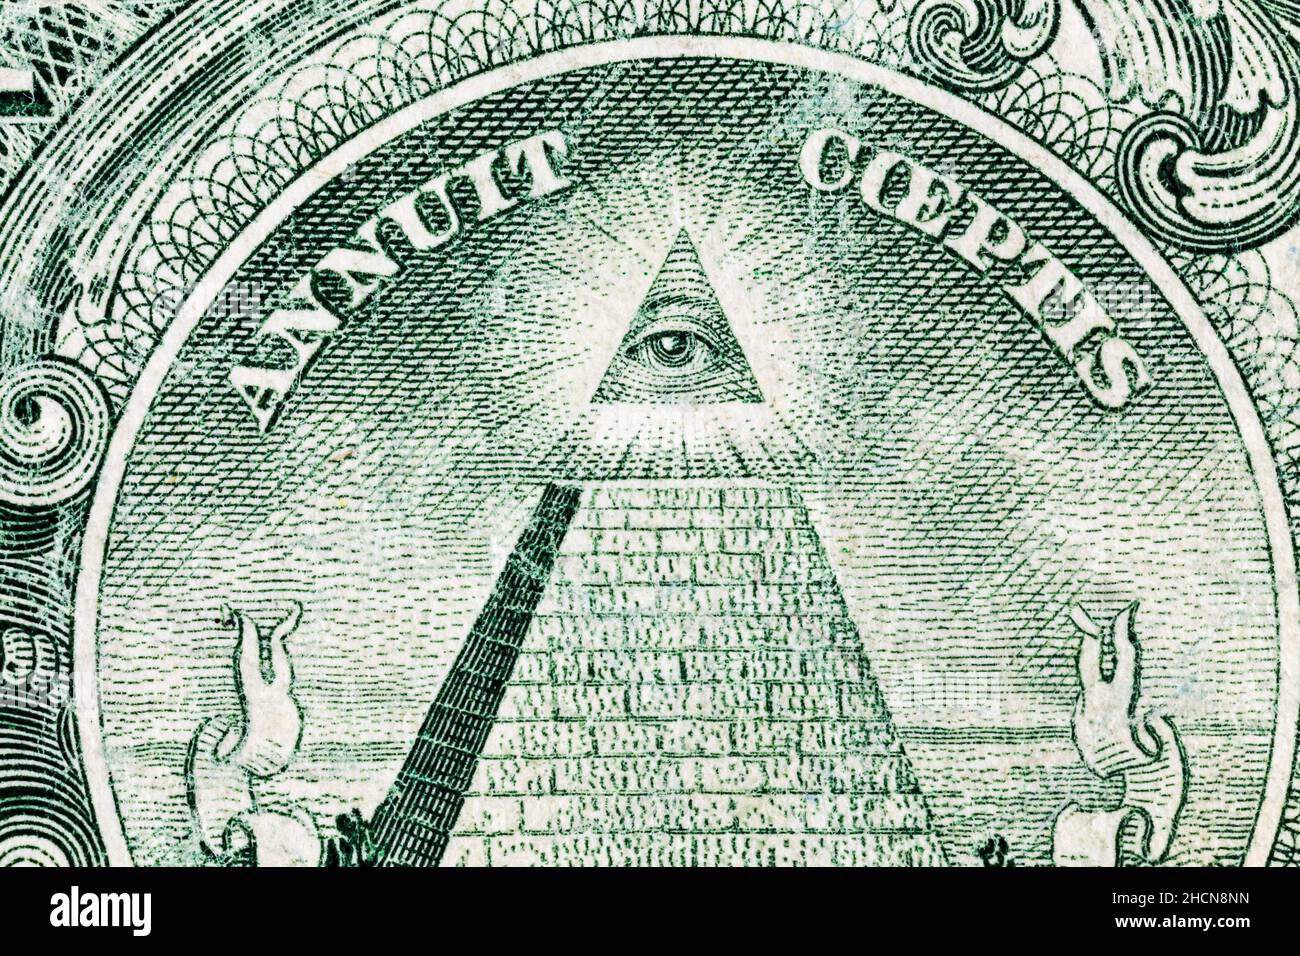 Close up of the Eye of Providence on a old worn US one dollar bill. Stock Photo